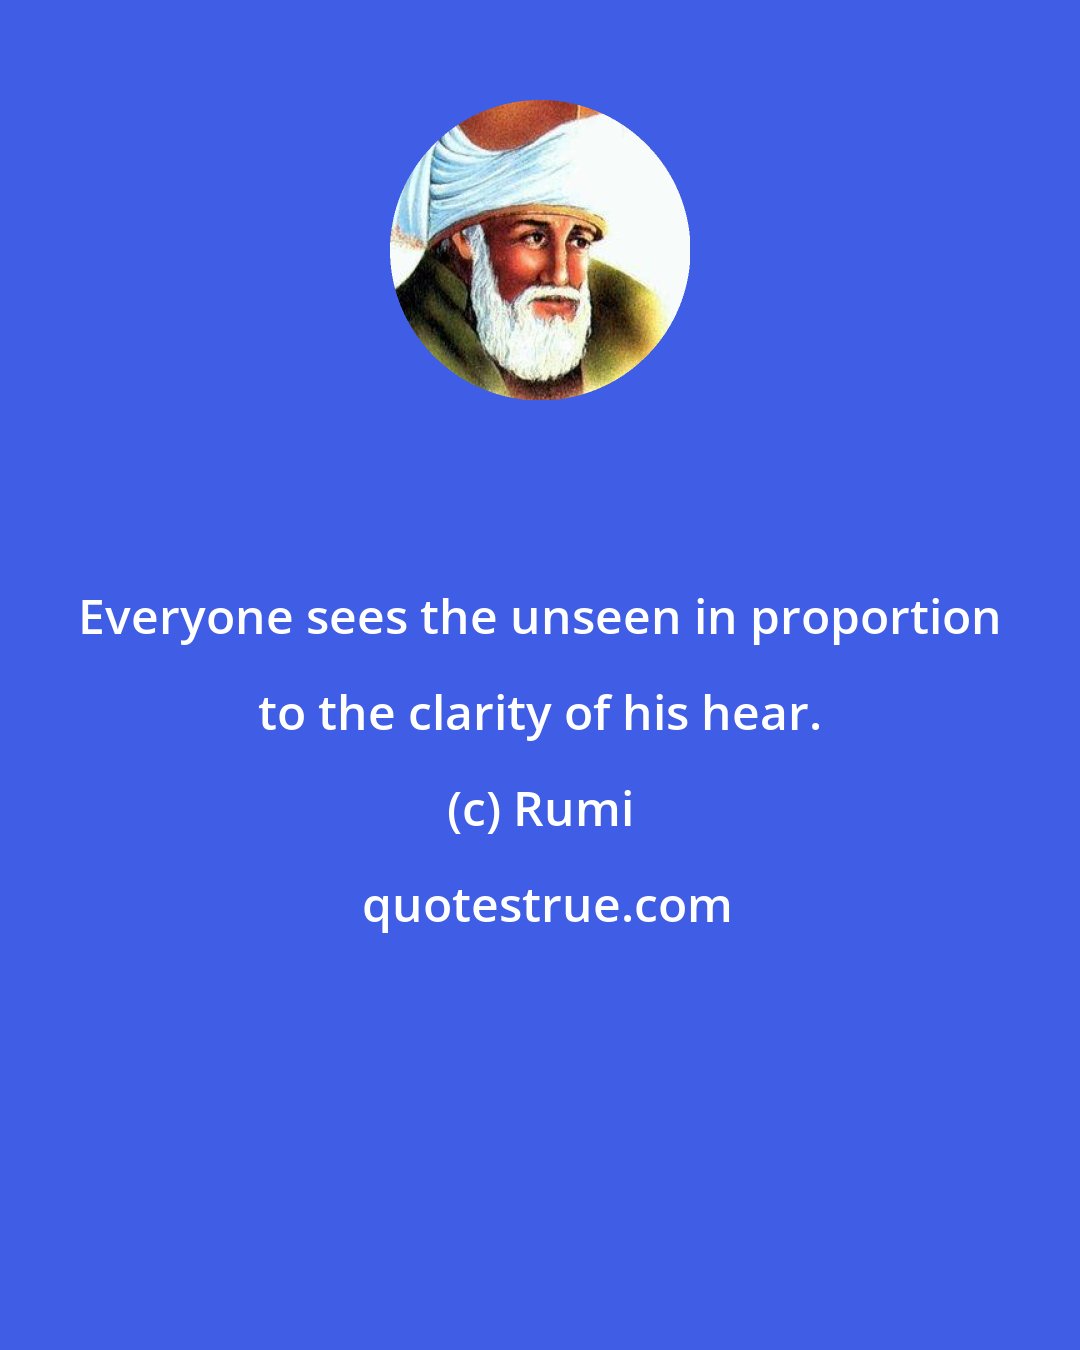 Rumi: Everyone sees the unseen in proportion to the clarity of his hear.